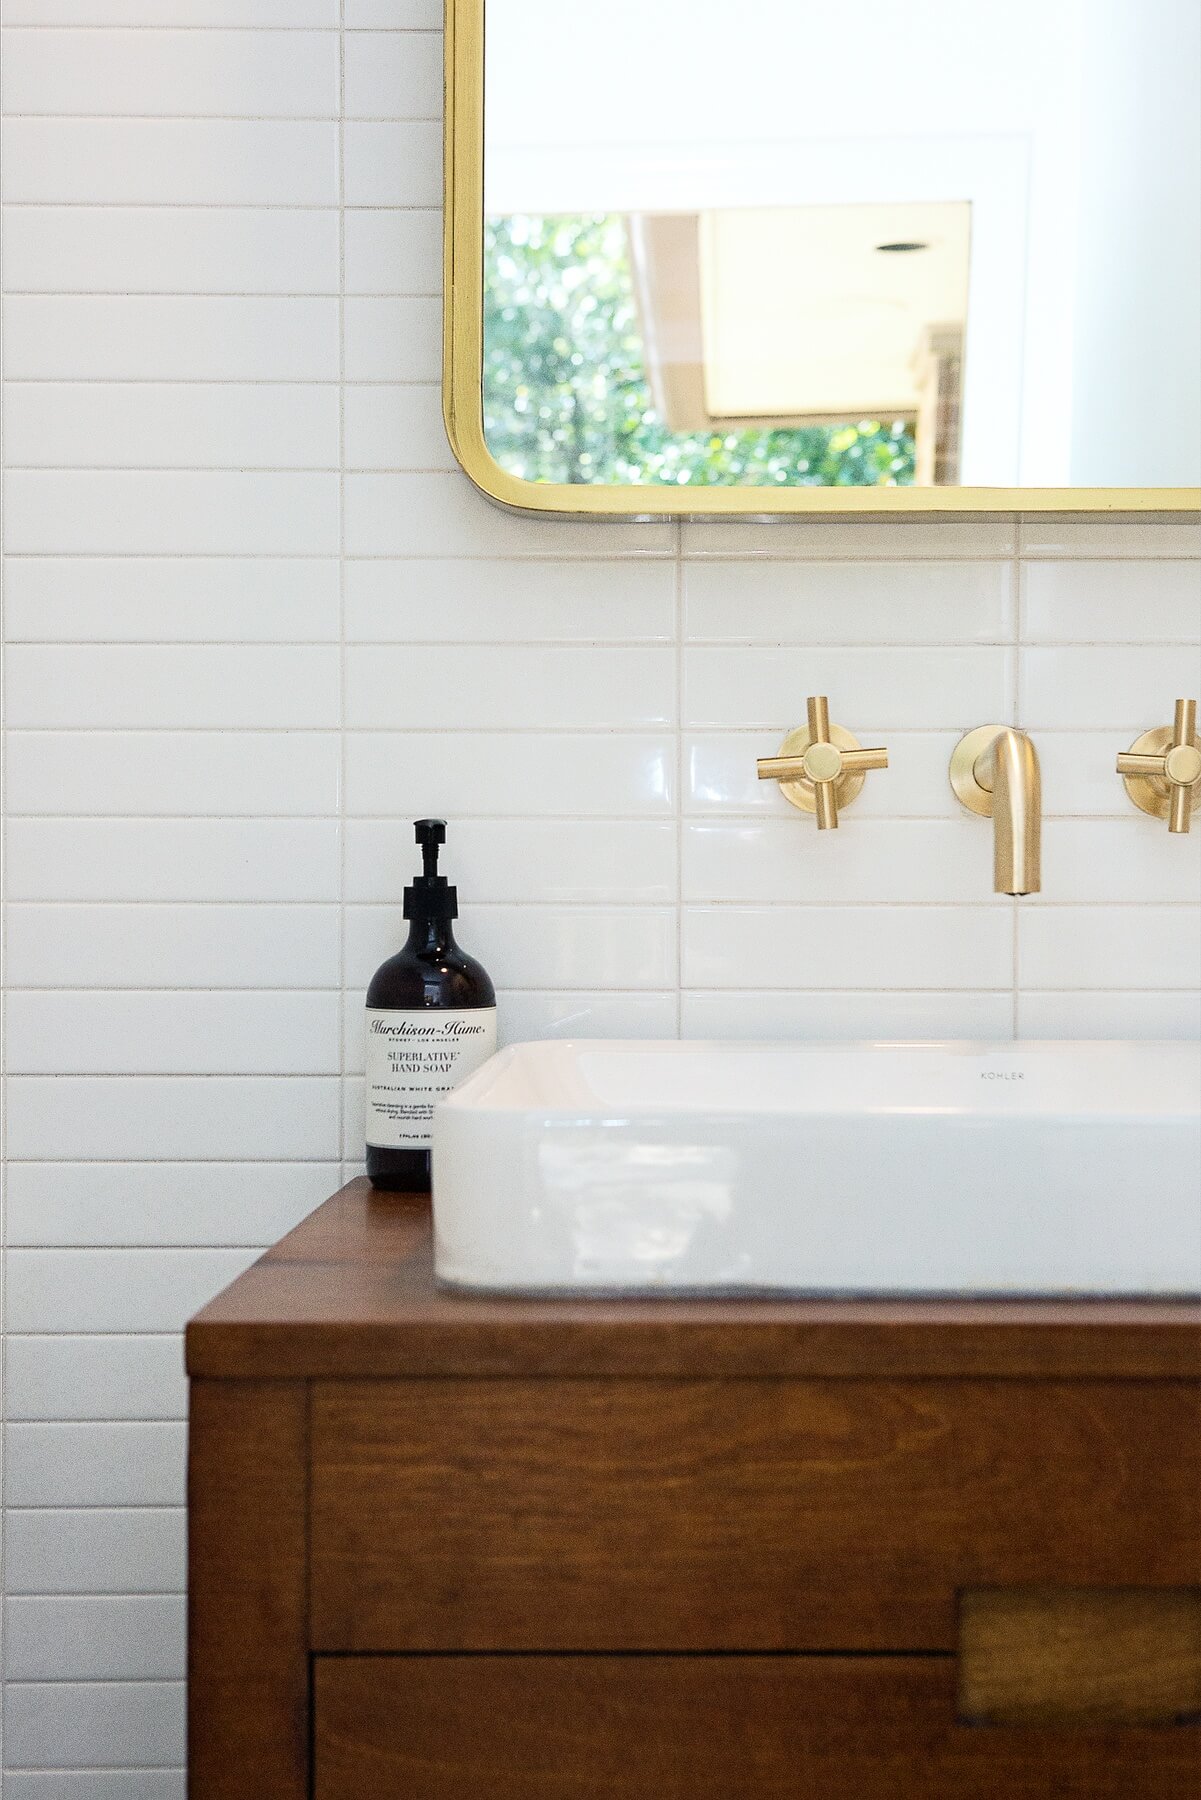 Alima loves to design bathrooms. "Choosing plumbing fixtures and mirrors and cabinet hardware is like choosing jewelry to accent an outfit," she says. "So many pretty options — I feel like a kid getting to play dress up!" Image: Ashley Lauren Studios